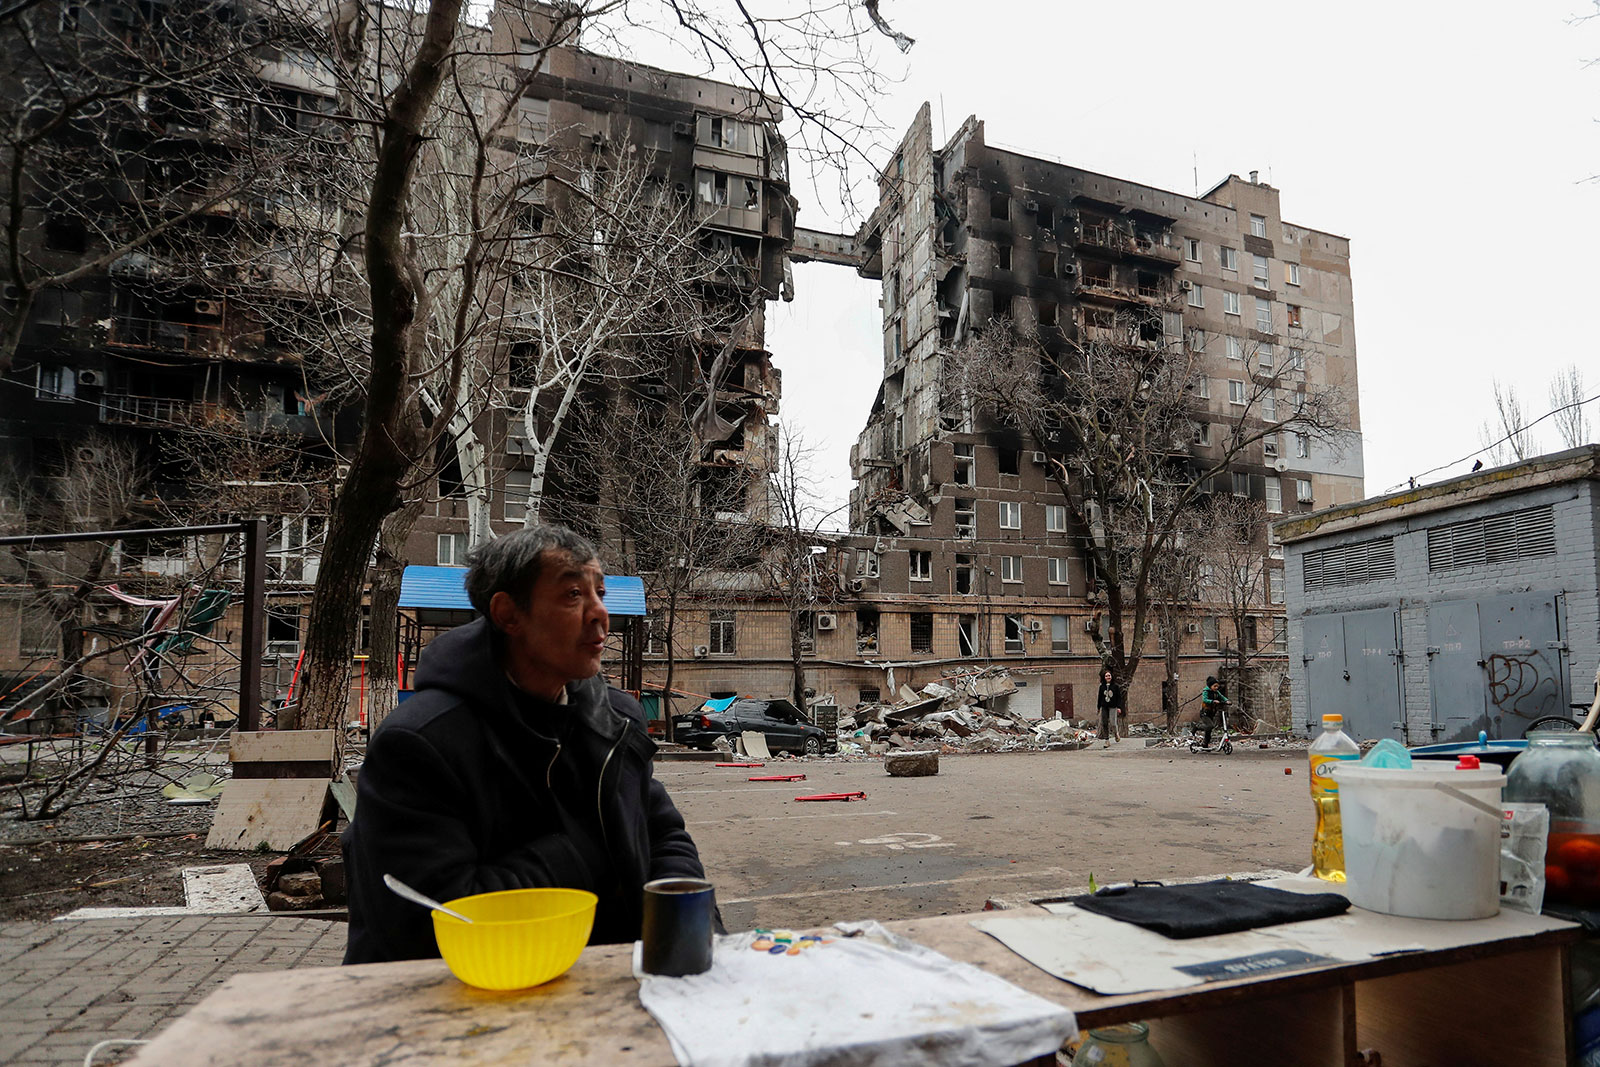 Russia gives Ukrainian forces last warning 7 hours to surrender or else as a man sits outside what used to be his home